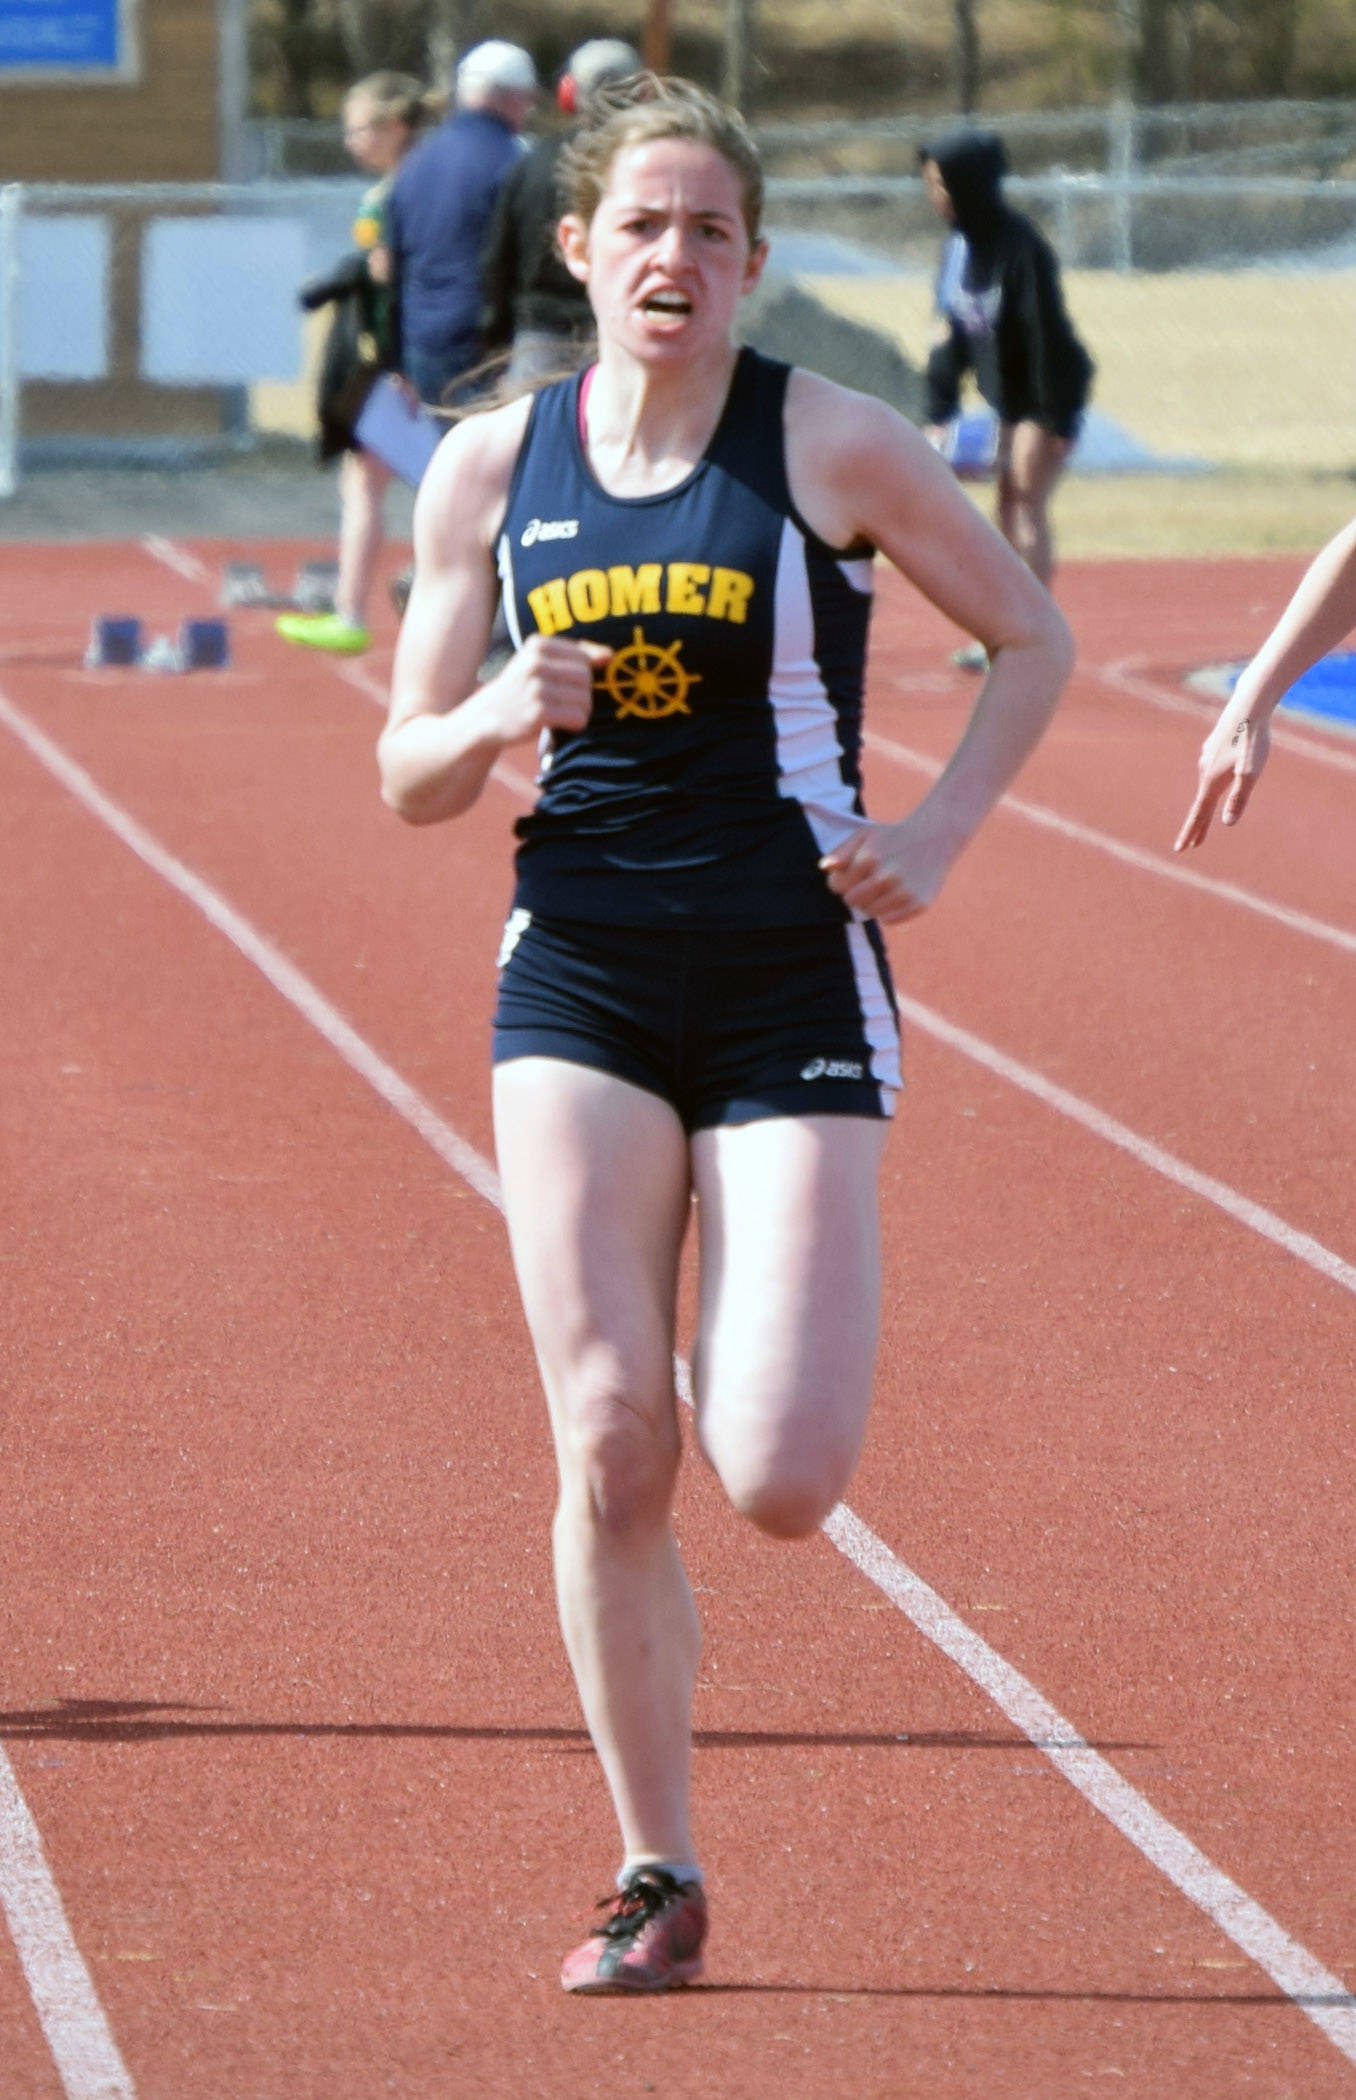 Homer’s Laura Inama runs to victory in the 100 meters at the SoHi Invitational on Saturday, May 1, 2021, at Soldotna High School in Soldotna, Alaska. (Photo by Jeff Helminiak/Peninsula Clarion)